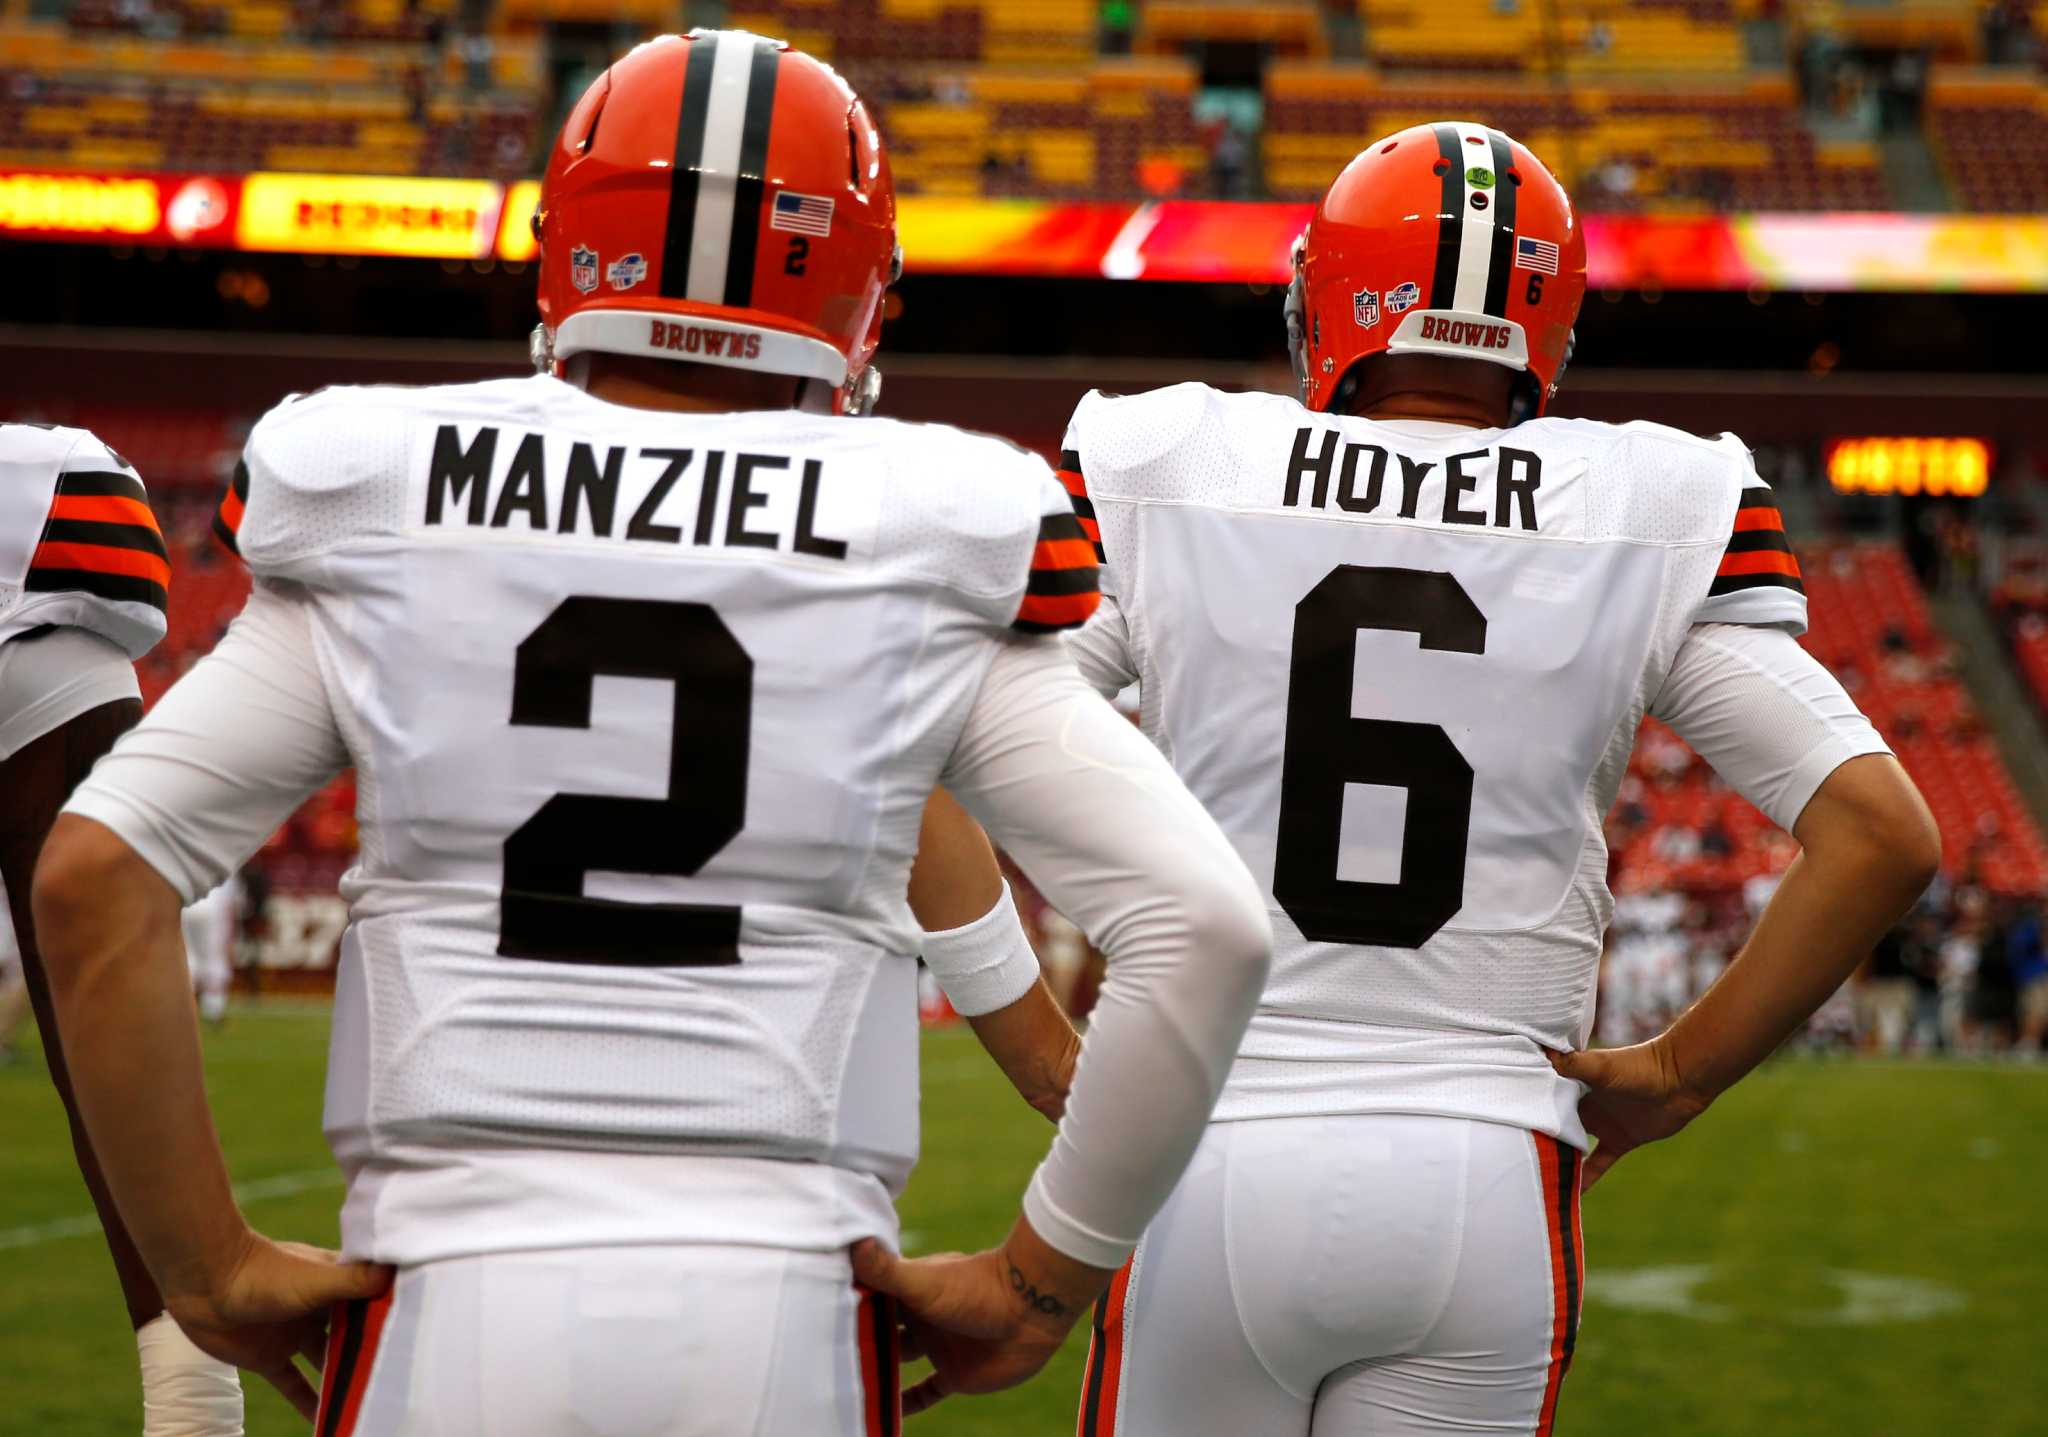 Johnny Manziel cut from Canadian Football League after violating